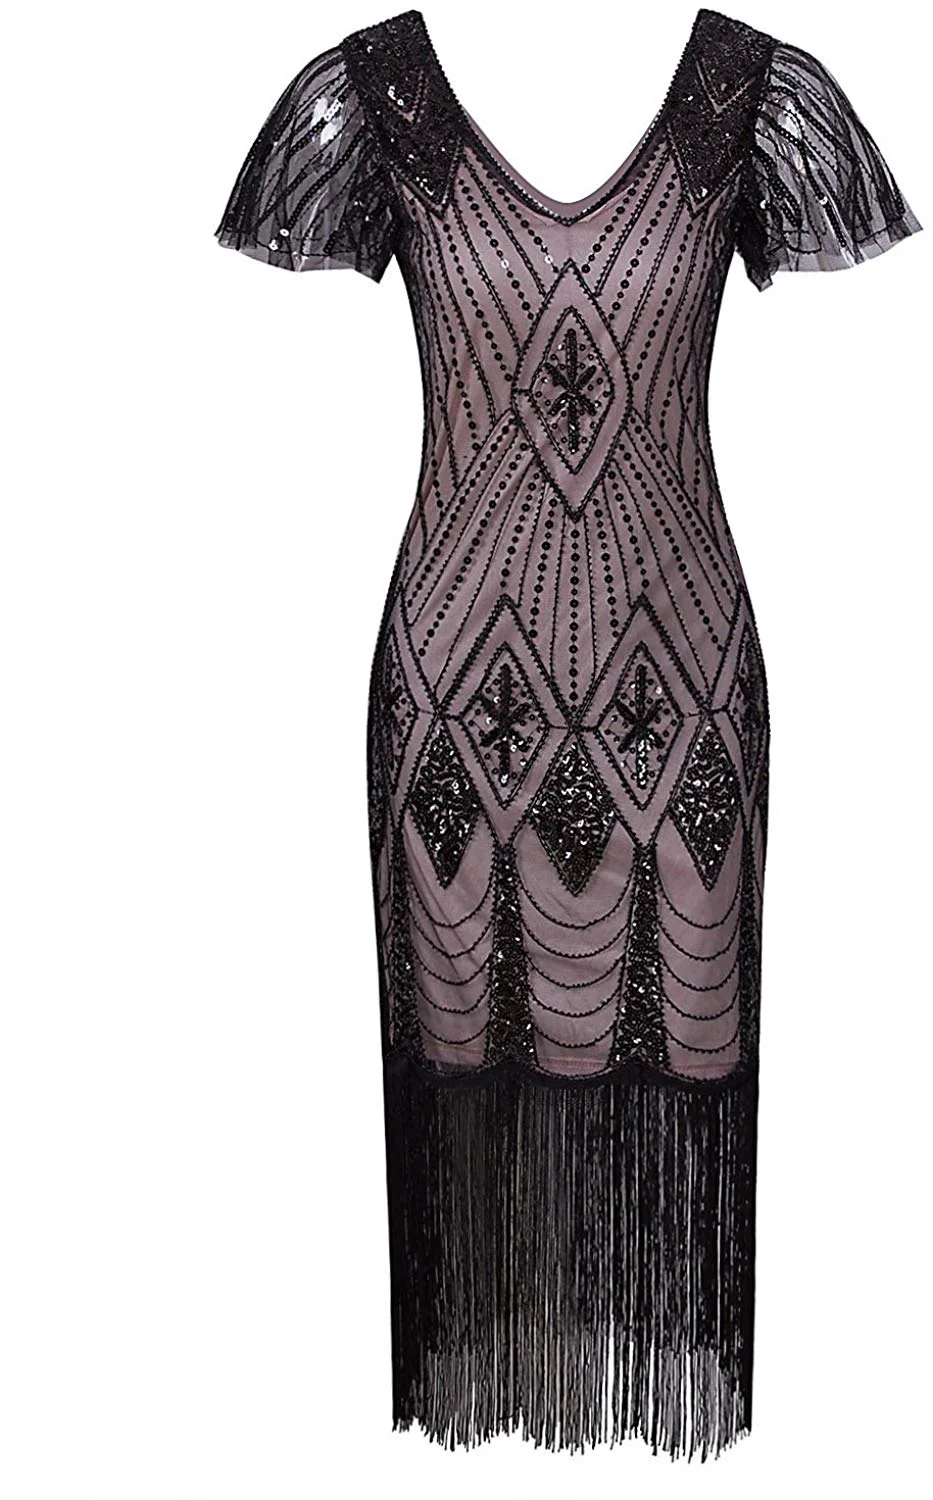 Women's 1920s Gatsby Inspired Sequin Beads Long Fringe Flapper Dress with Sleeves